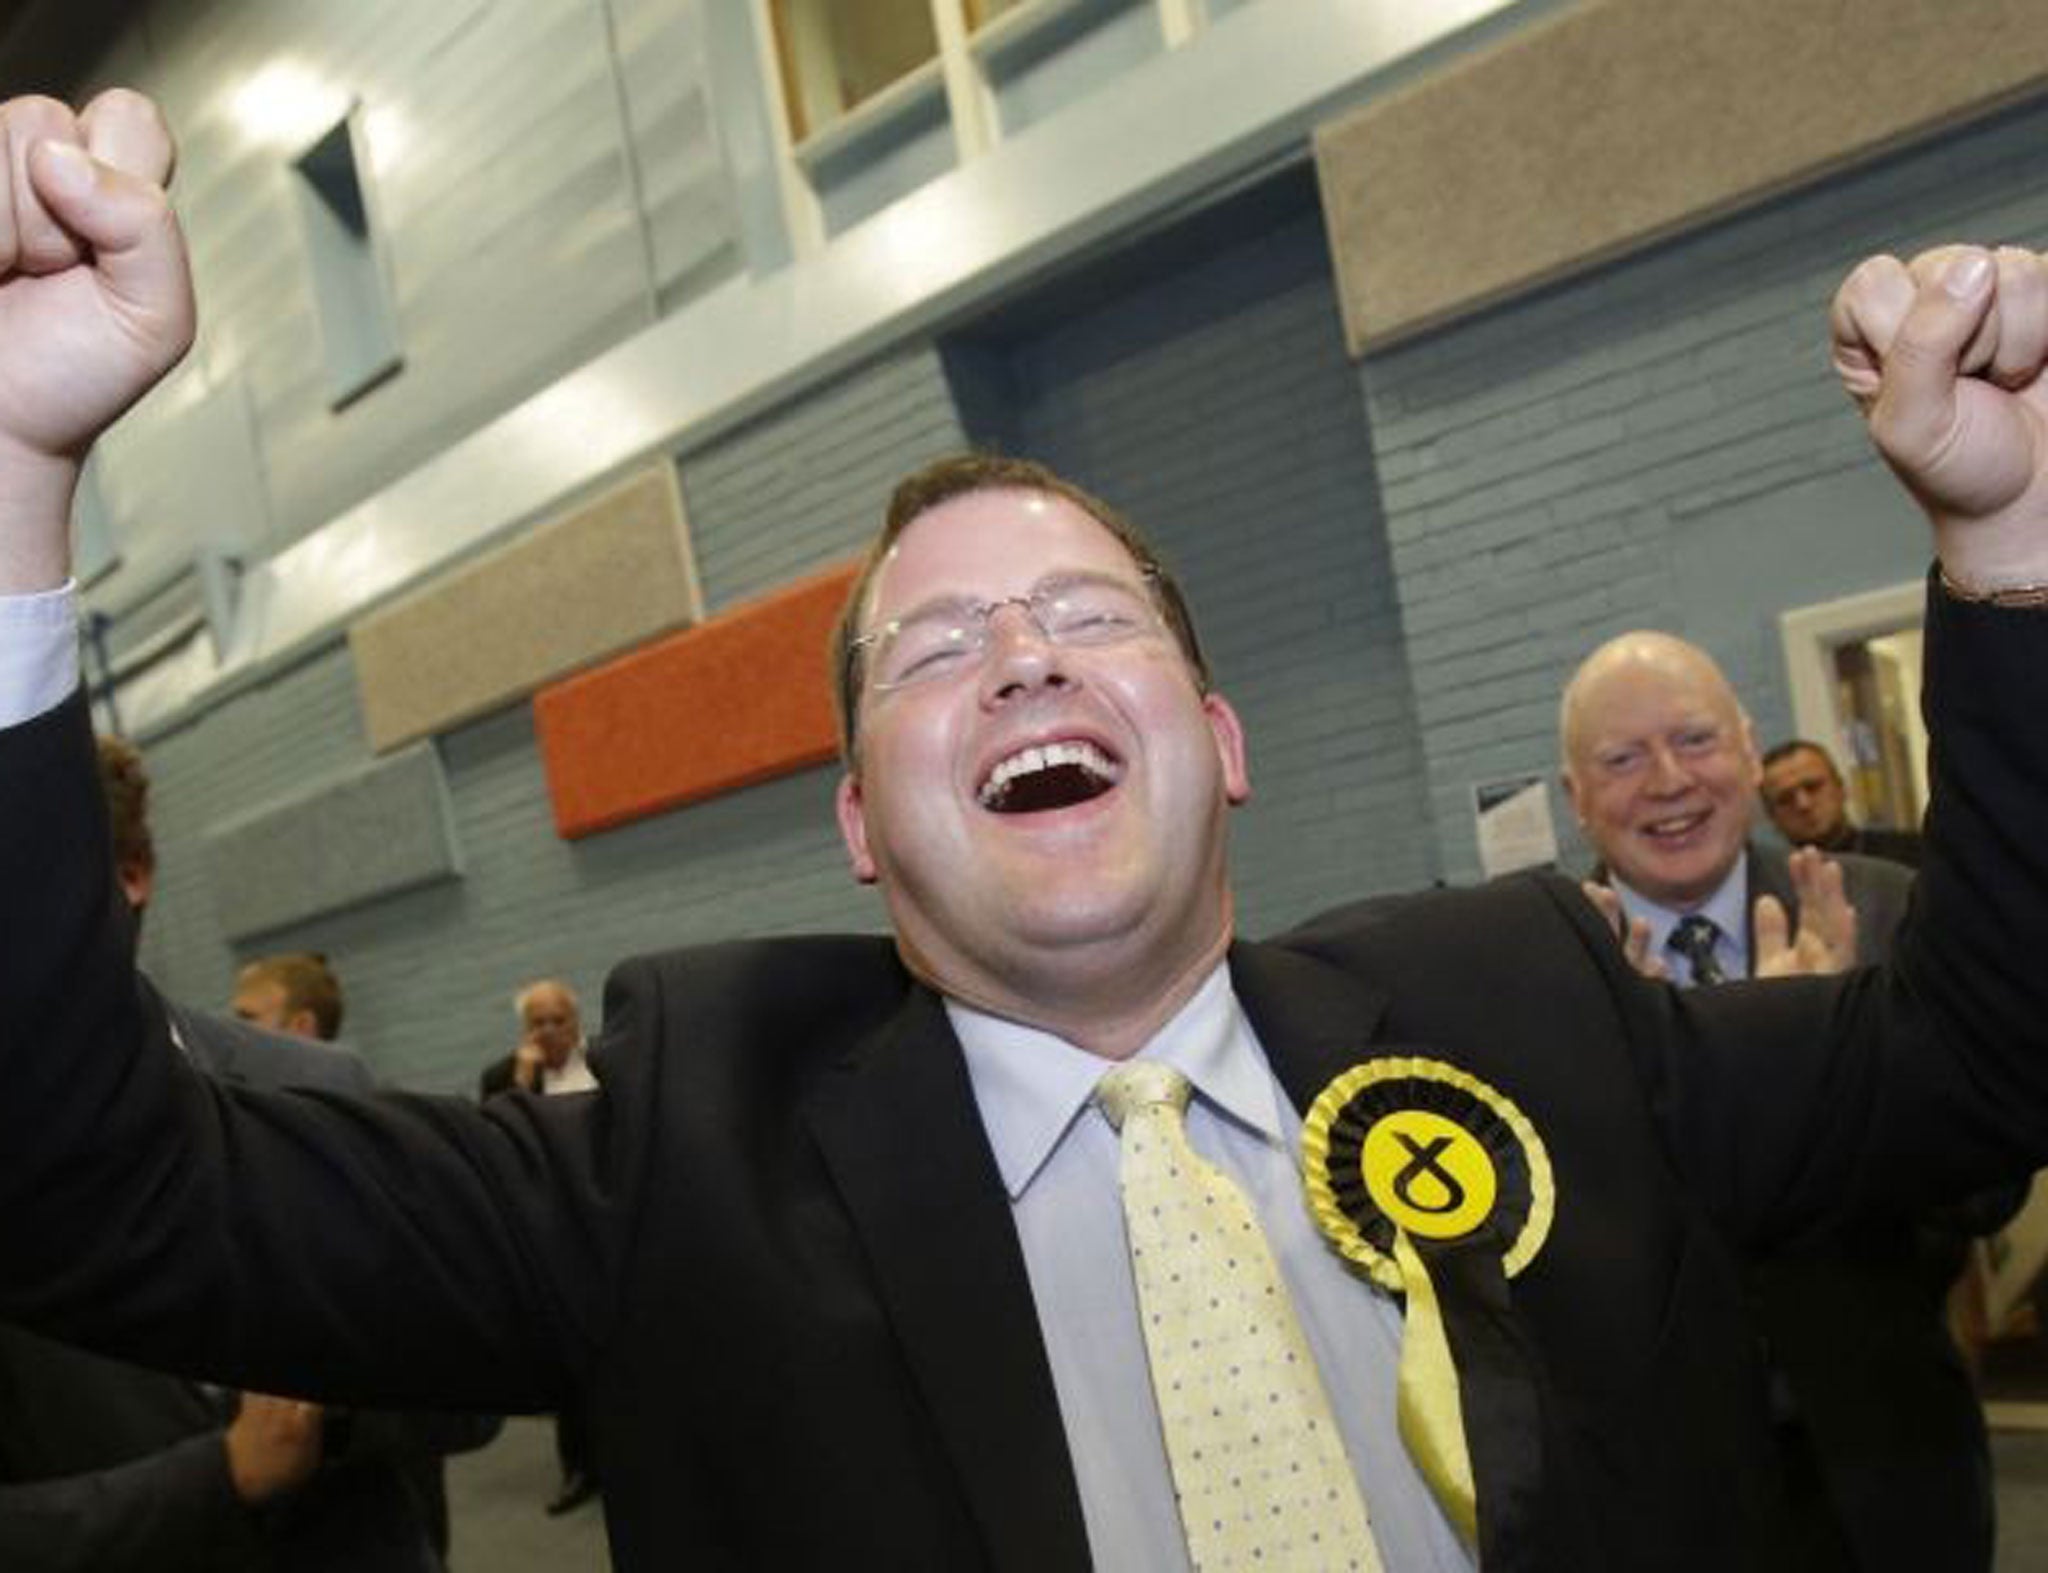 SNP candidate Mark McDonald won the Aberdeen Donside byelection with 9,418 votes